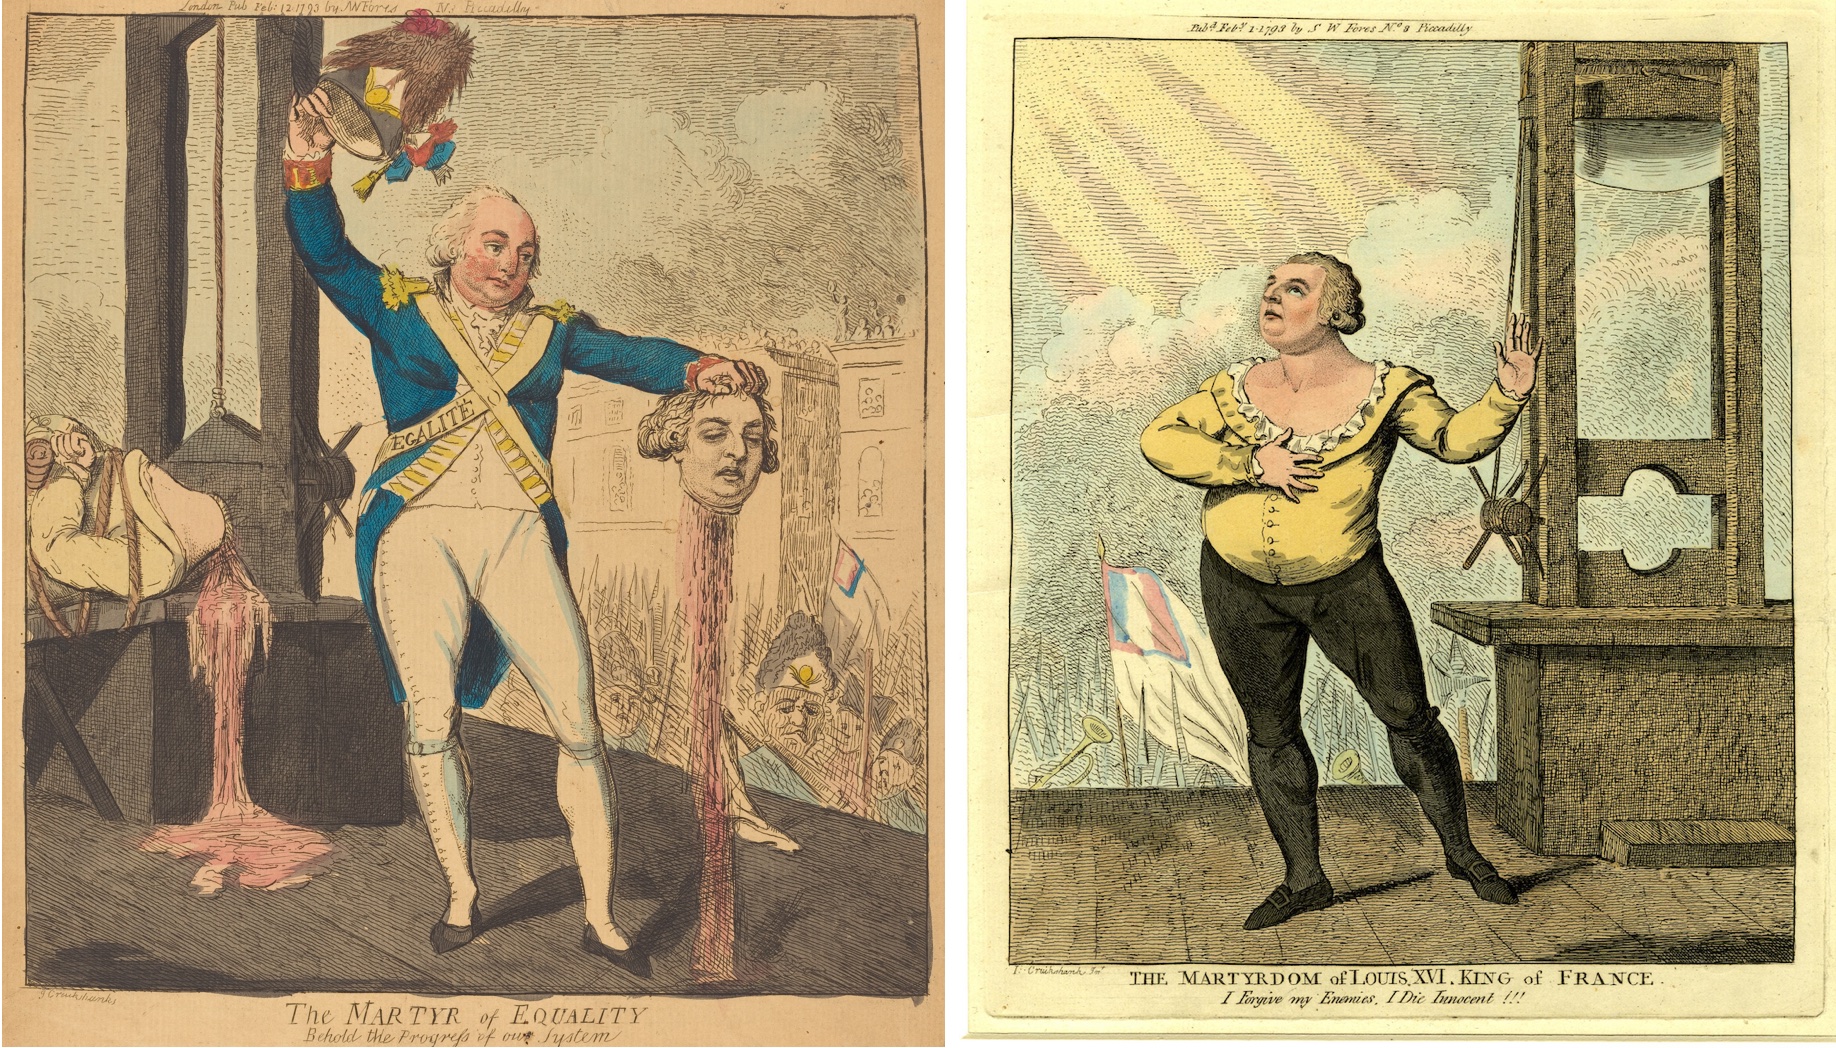  English cartoon criticizing the execution of Louis XVI, reading “The martyr of equality. Behold the progress of our system,” 1793 (left), and a British etching of Louis XVI just before his execution with the caption, “The martyrdom of Louis XVI King of France, 'I forgive my enemies. I die innocent!!!',” 1793 (British Royal Museum) (right).